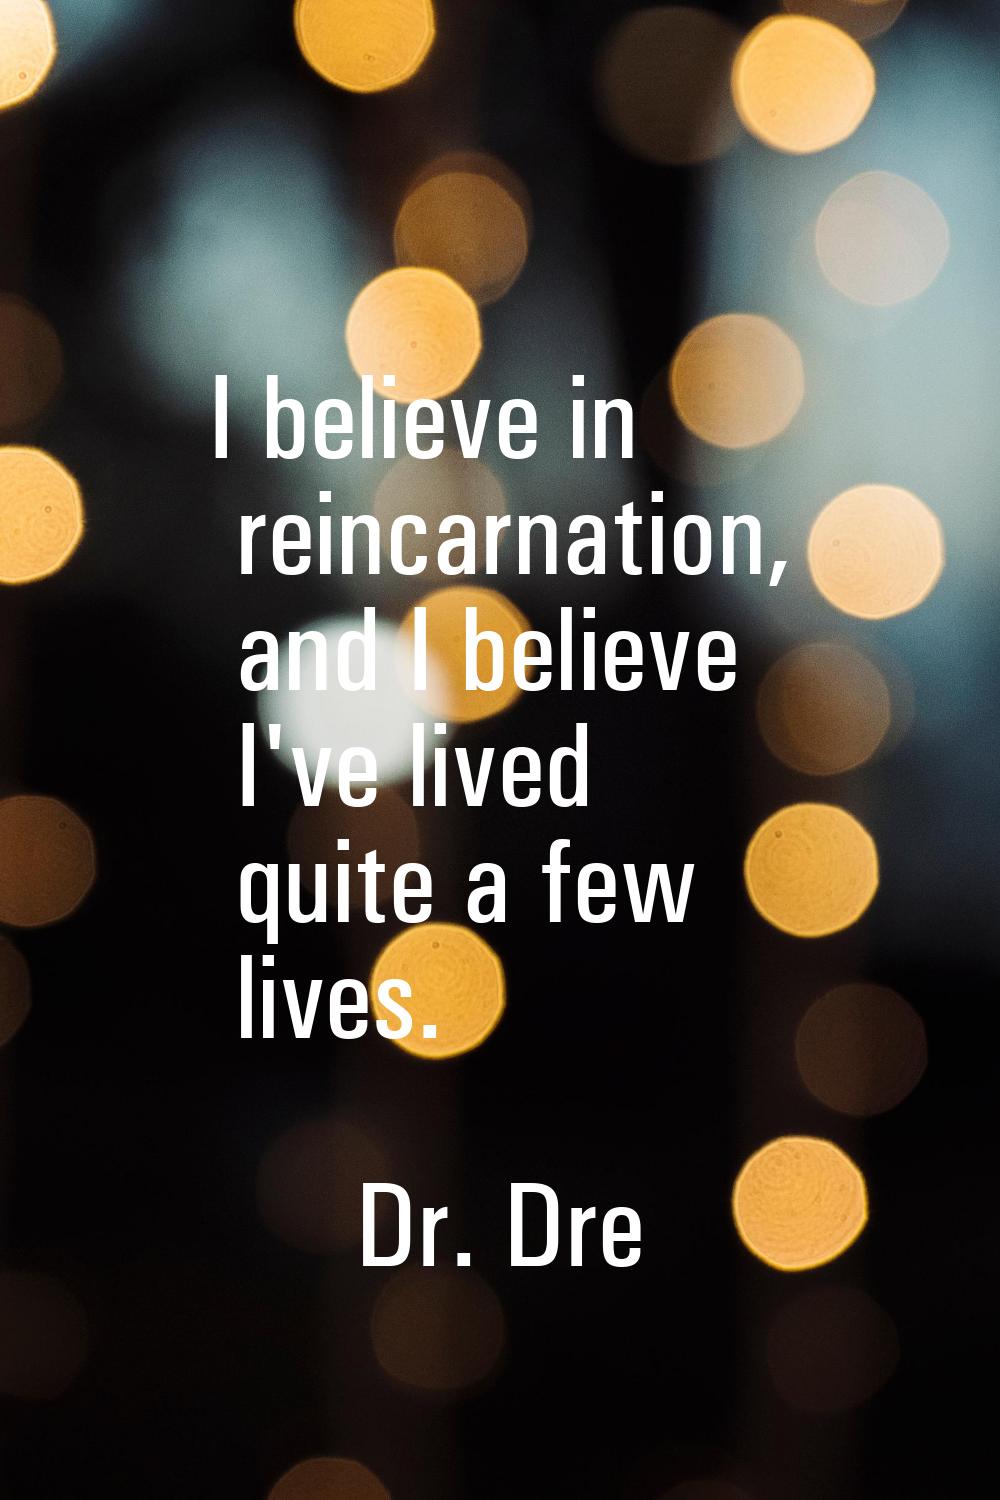 I believe in reincarnation, and I believe I've lived quite a few lives.